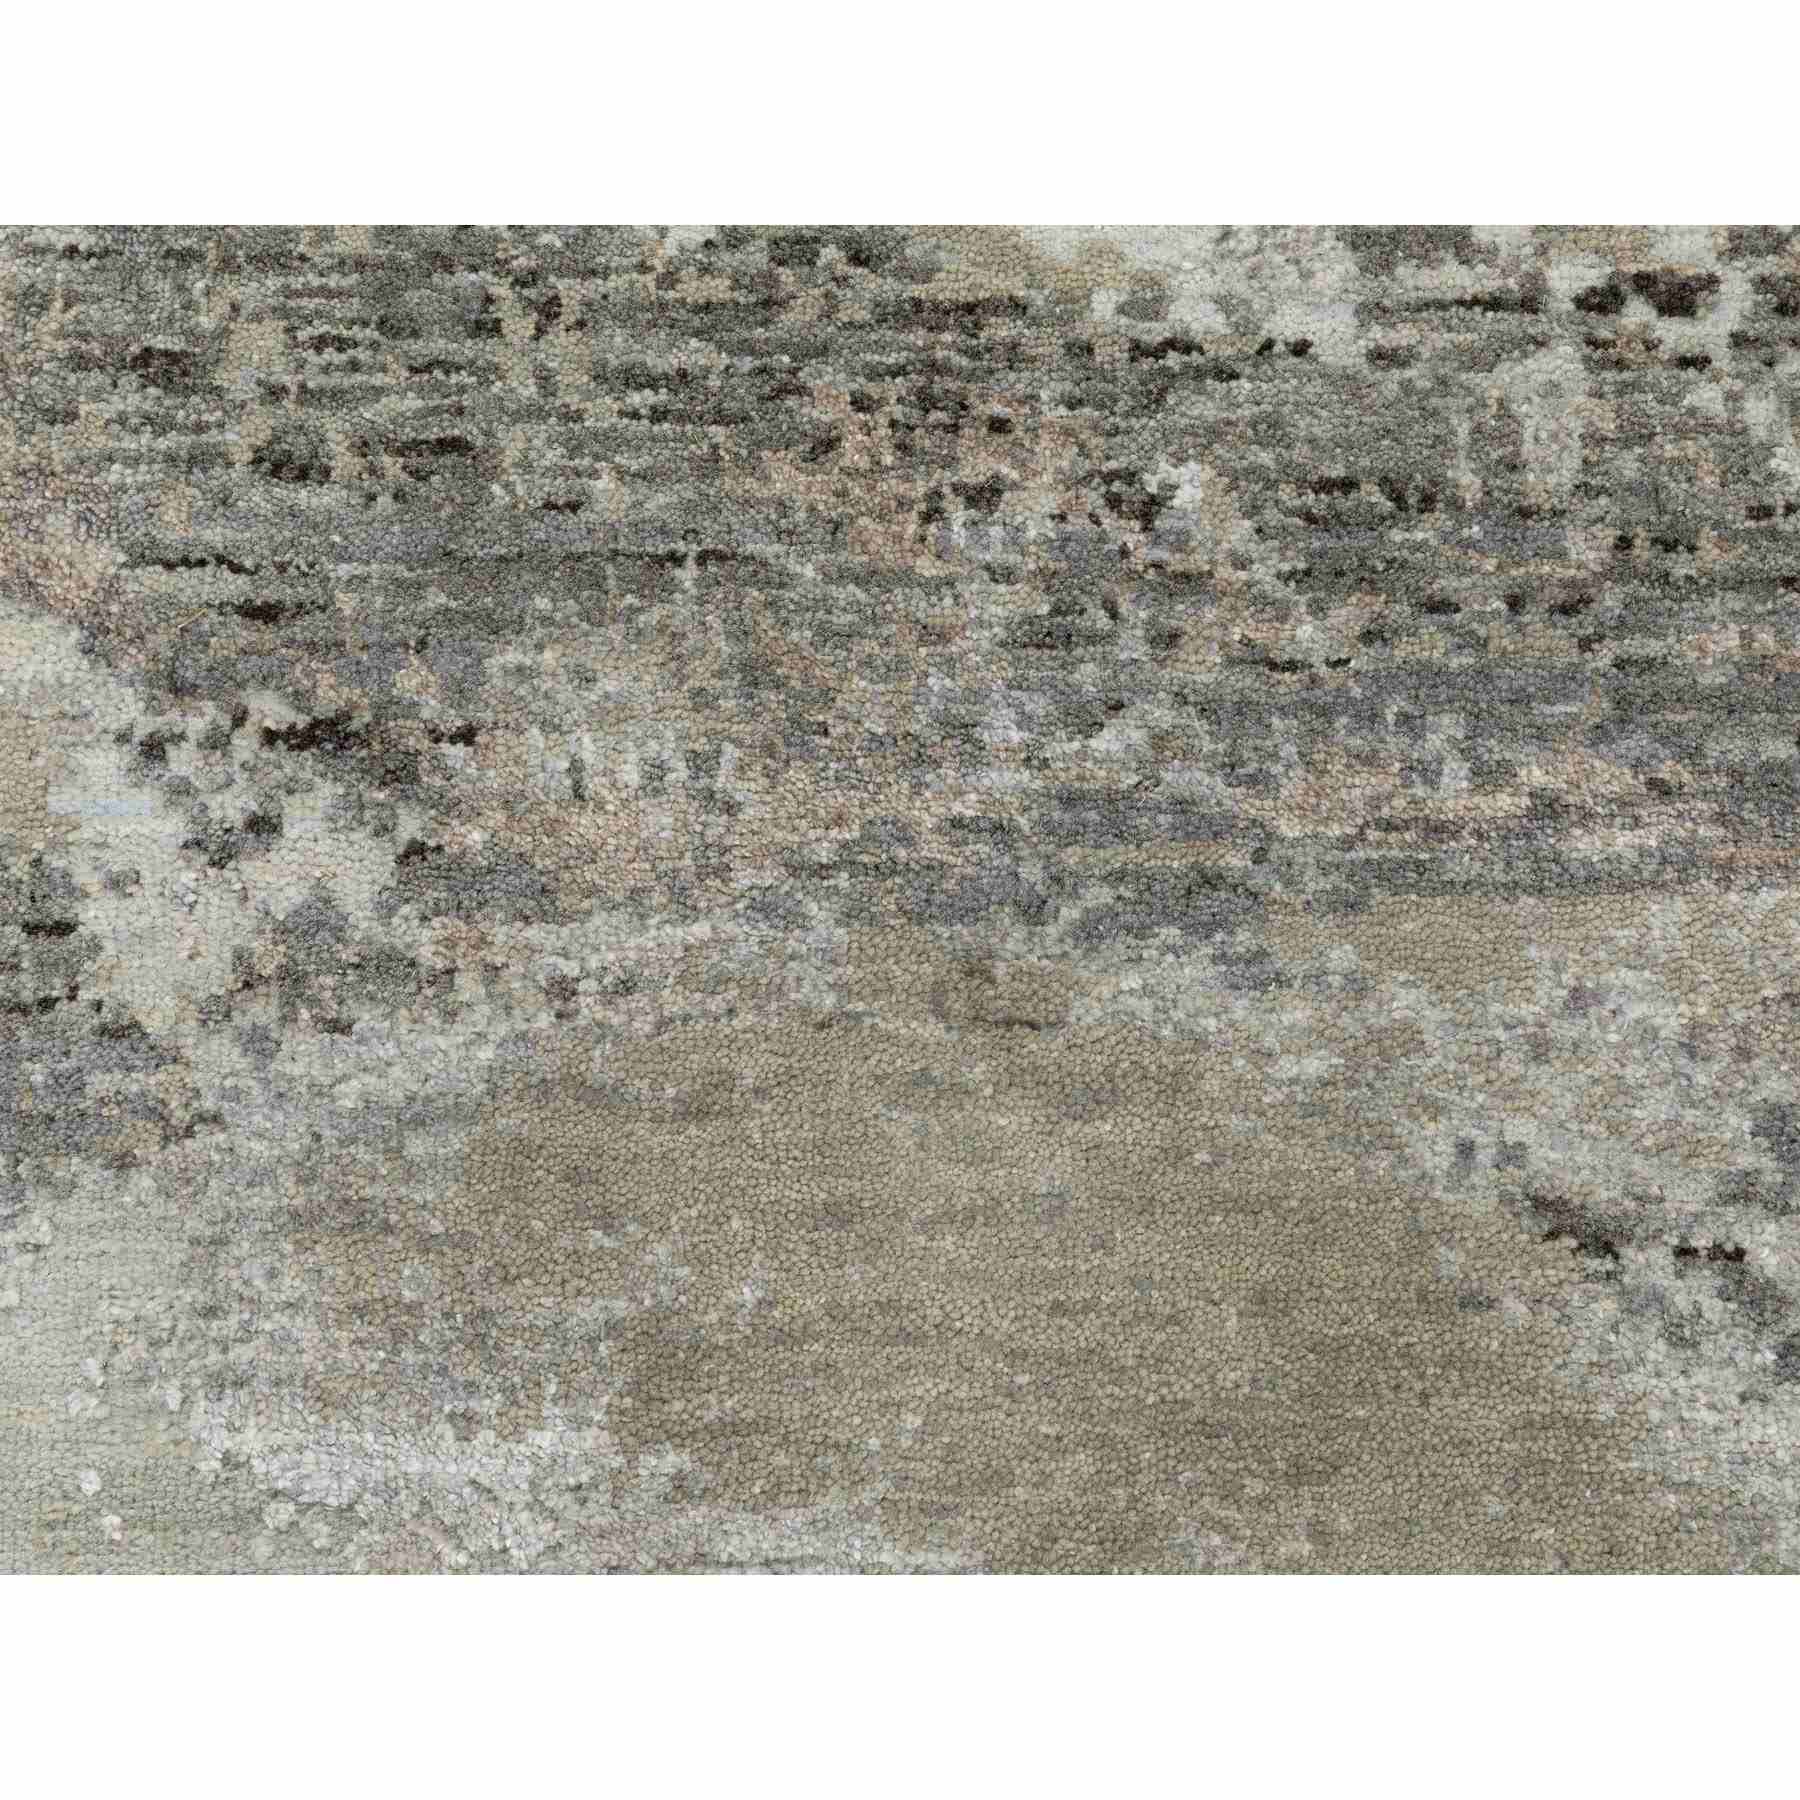 Modern-and-Contemporary-Hand-Knotted-Rug-292260